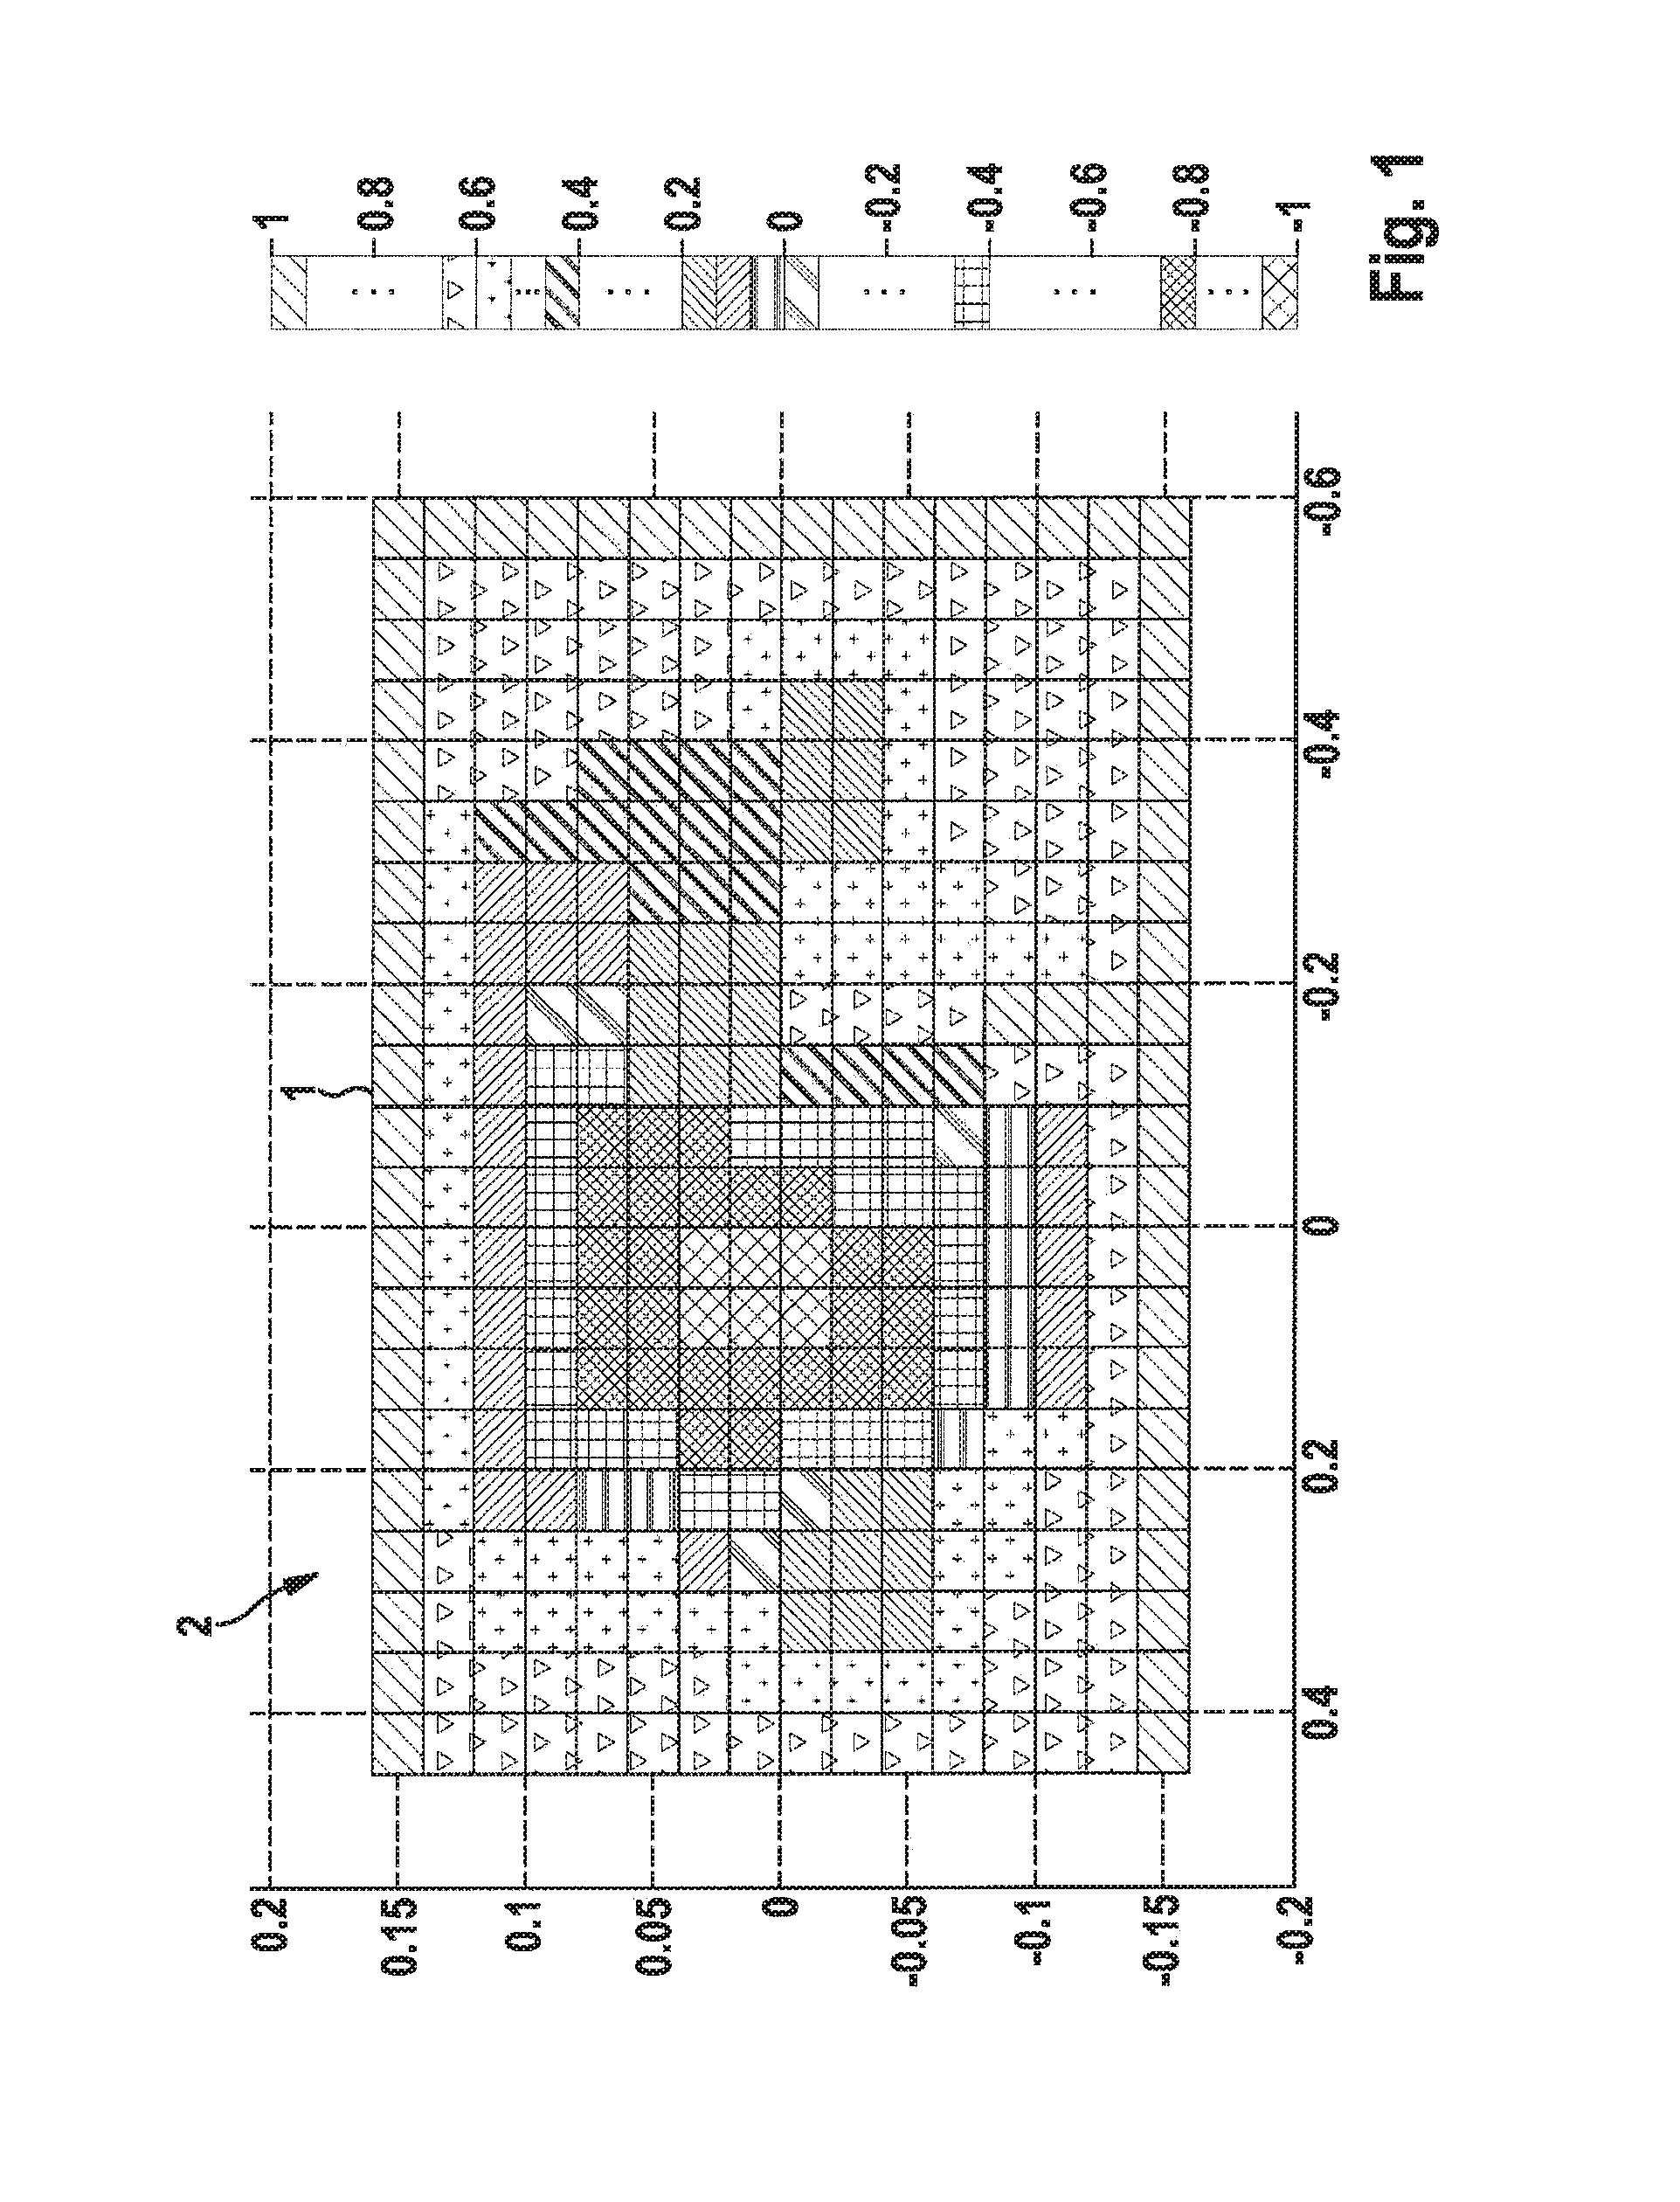 Method for ascertaining a degree of awareness of a vehicle operator